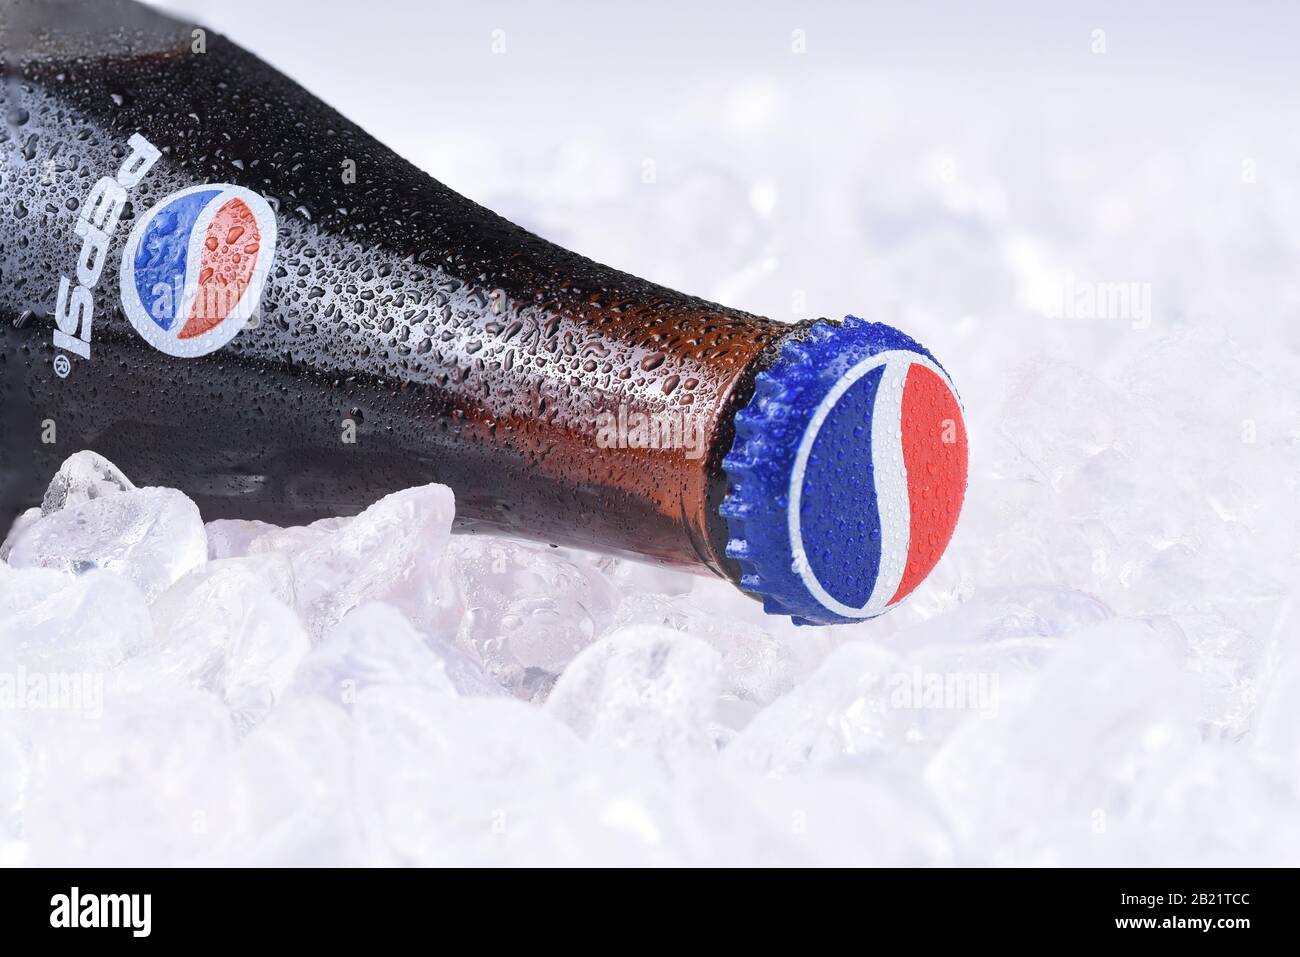 IRVINE, CALIFORNIA - FEBRUARY 7, 2017: Pepsi-Cola Bottle on ice. Pepsi is one of the leading producers of soda and soft drinks in the USA. Stock Photo